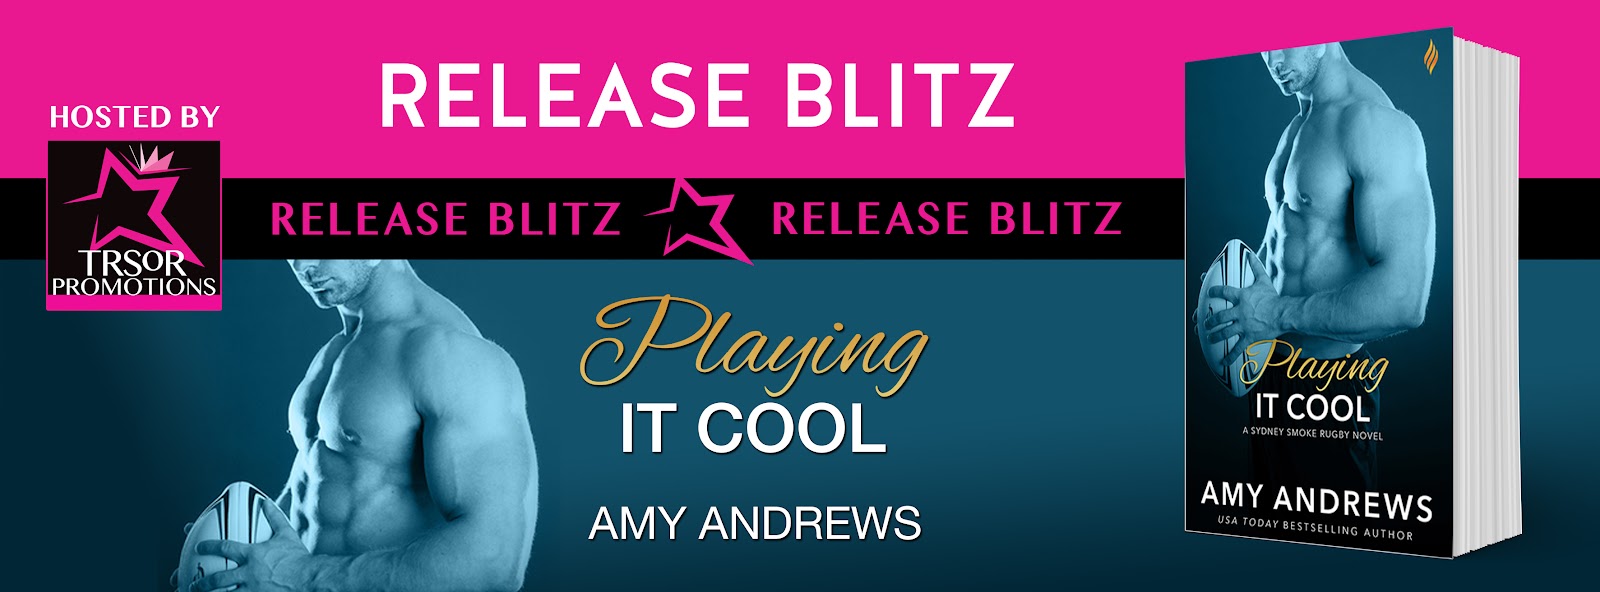 PLAYING_IT_COOL_RELEASE_BLITZ.jpg